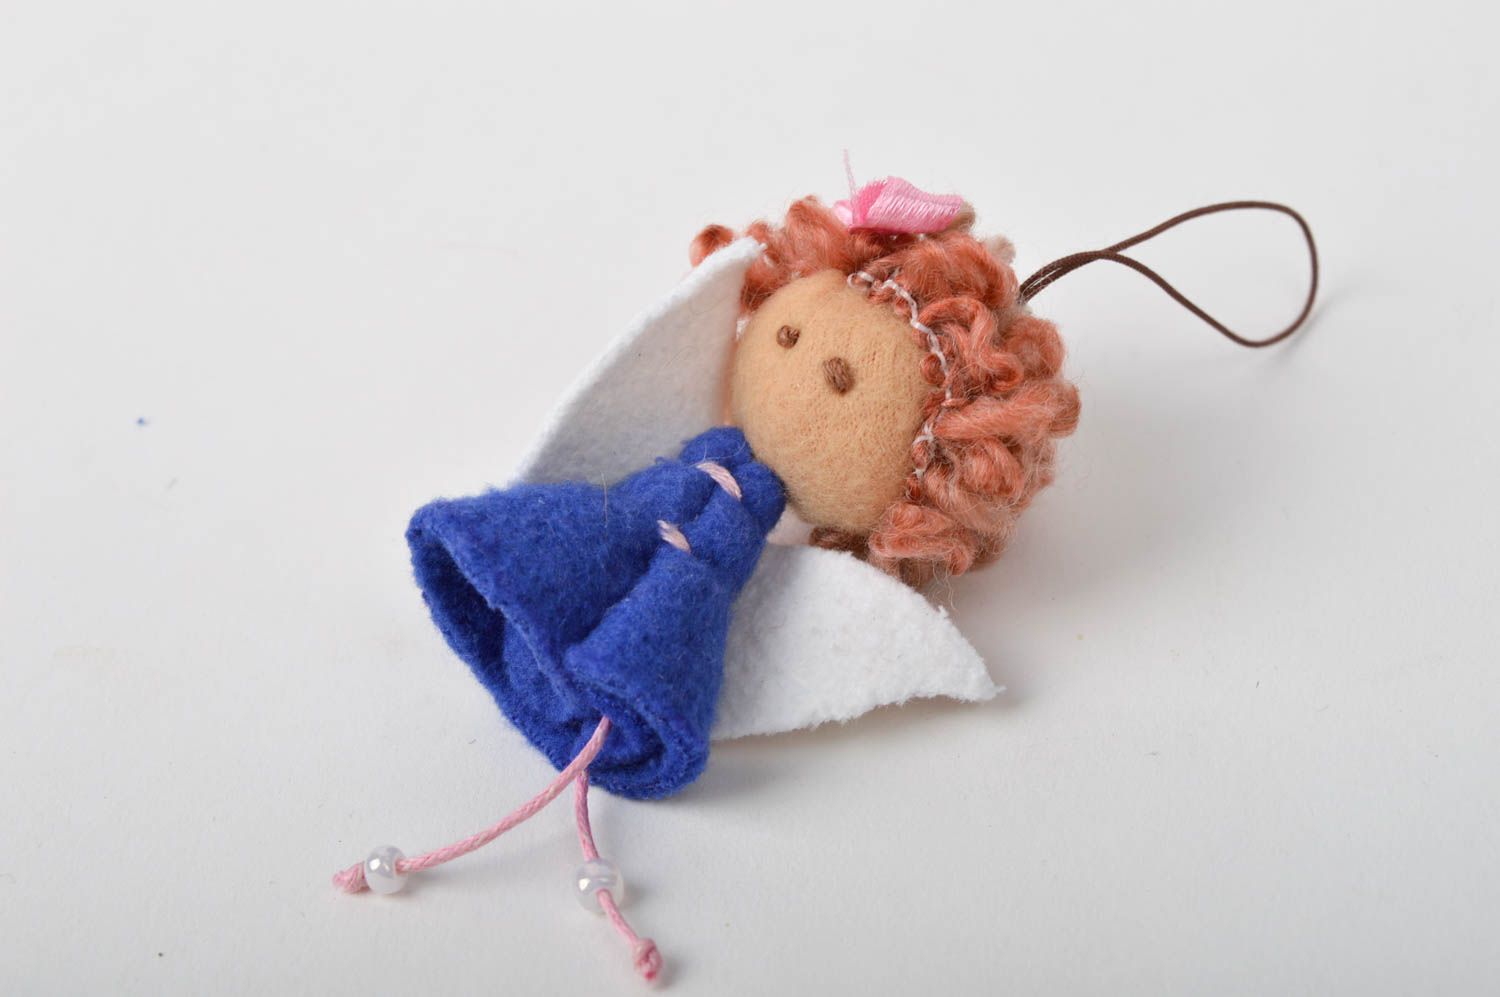 Handmade keychain unusual toy textile doll gift ideas gift for children photo 1